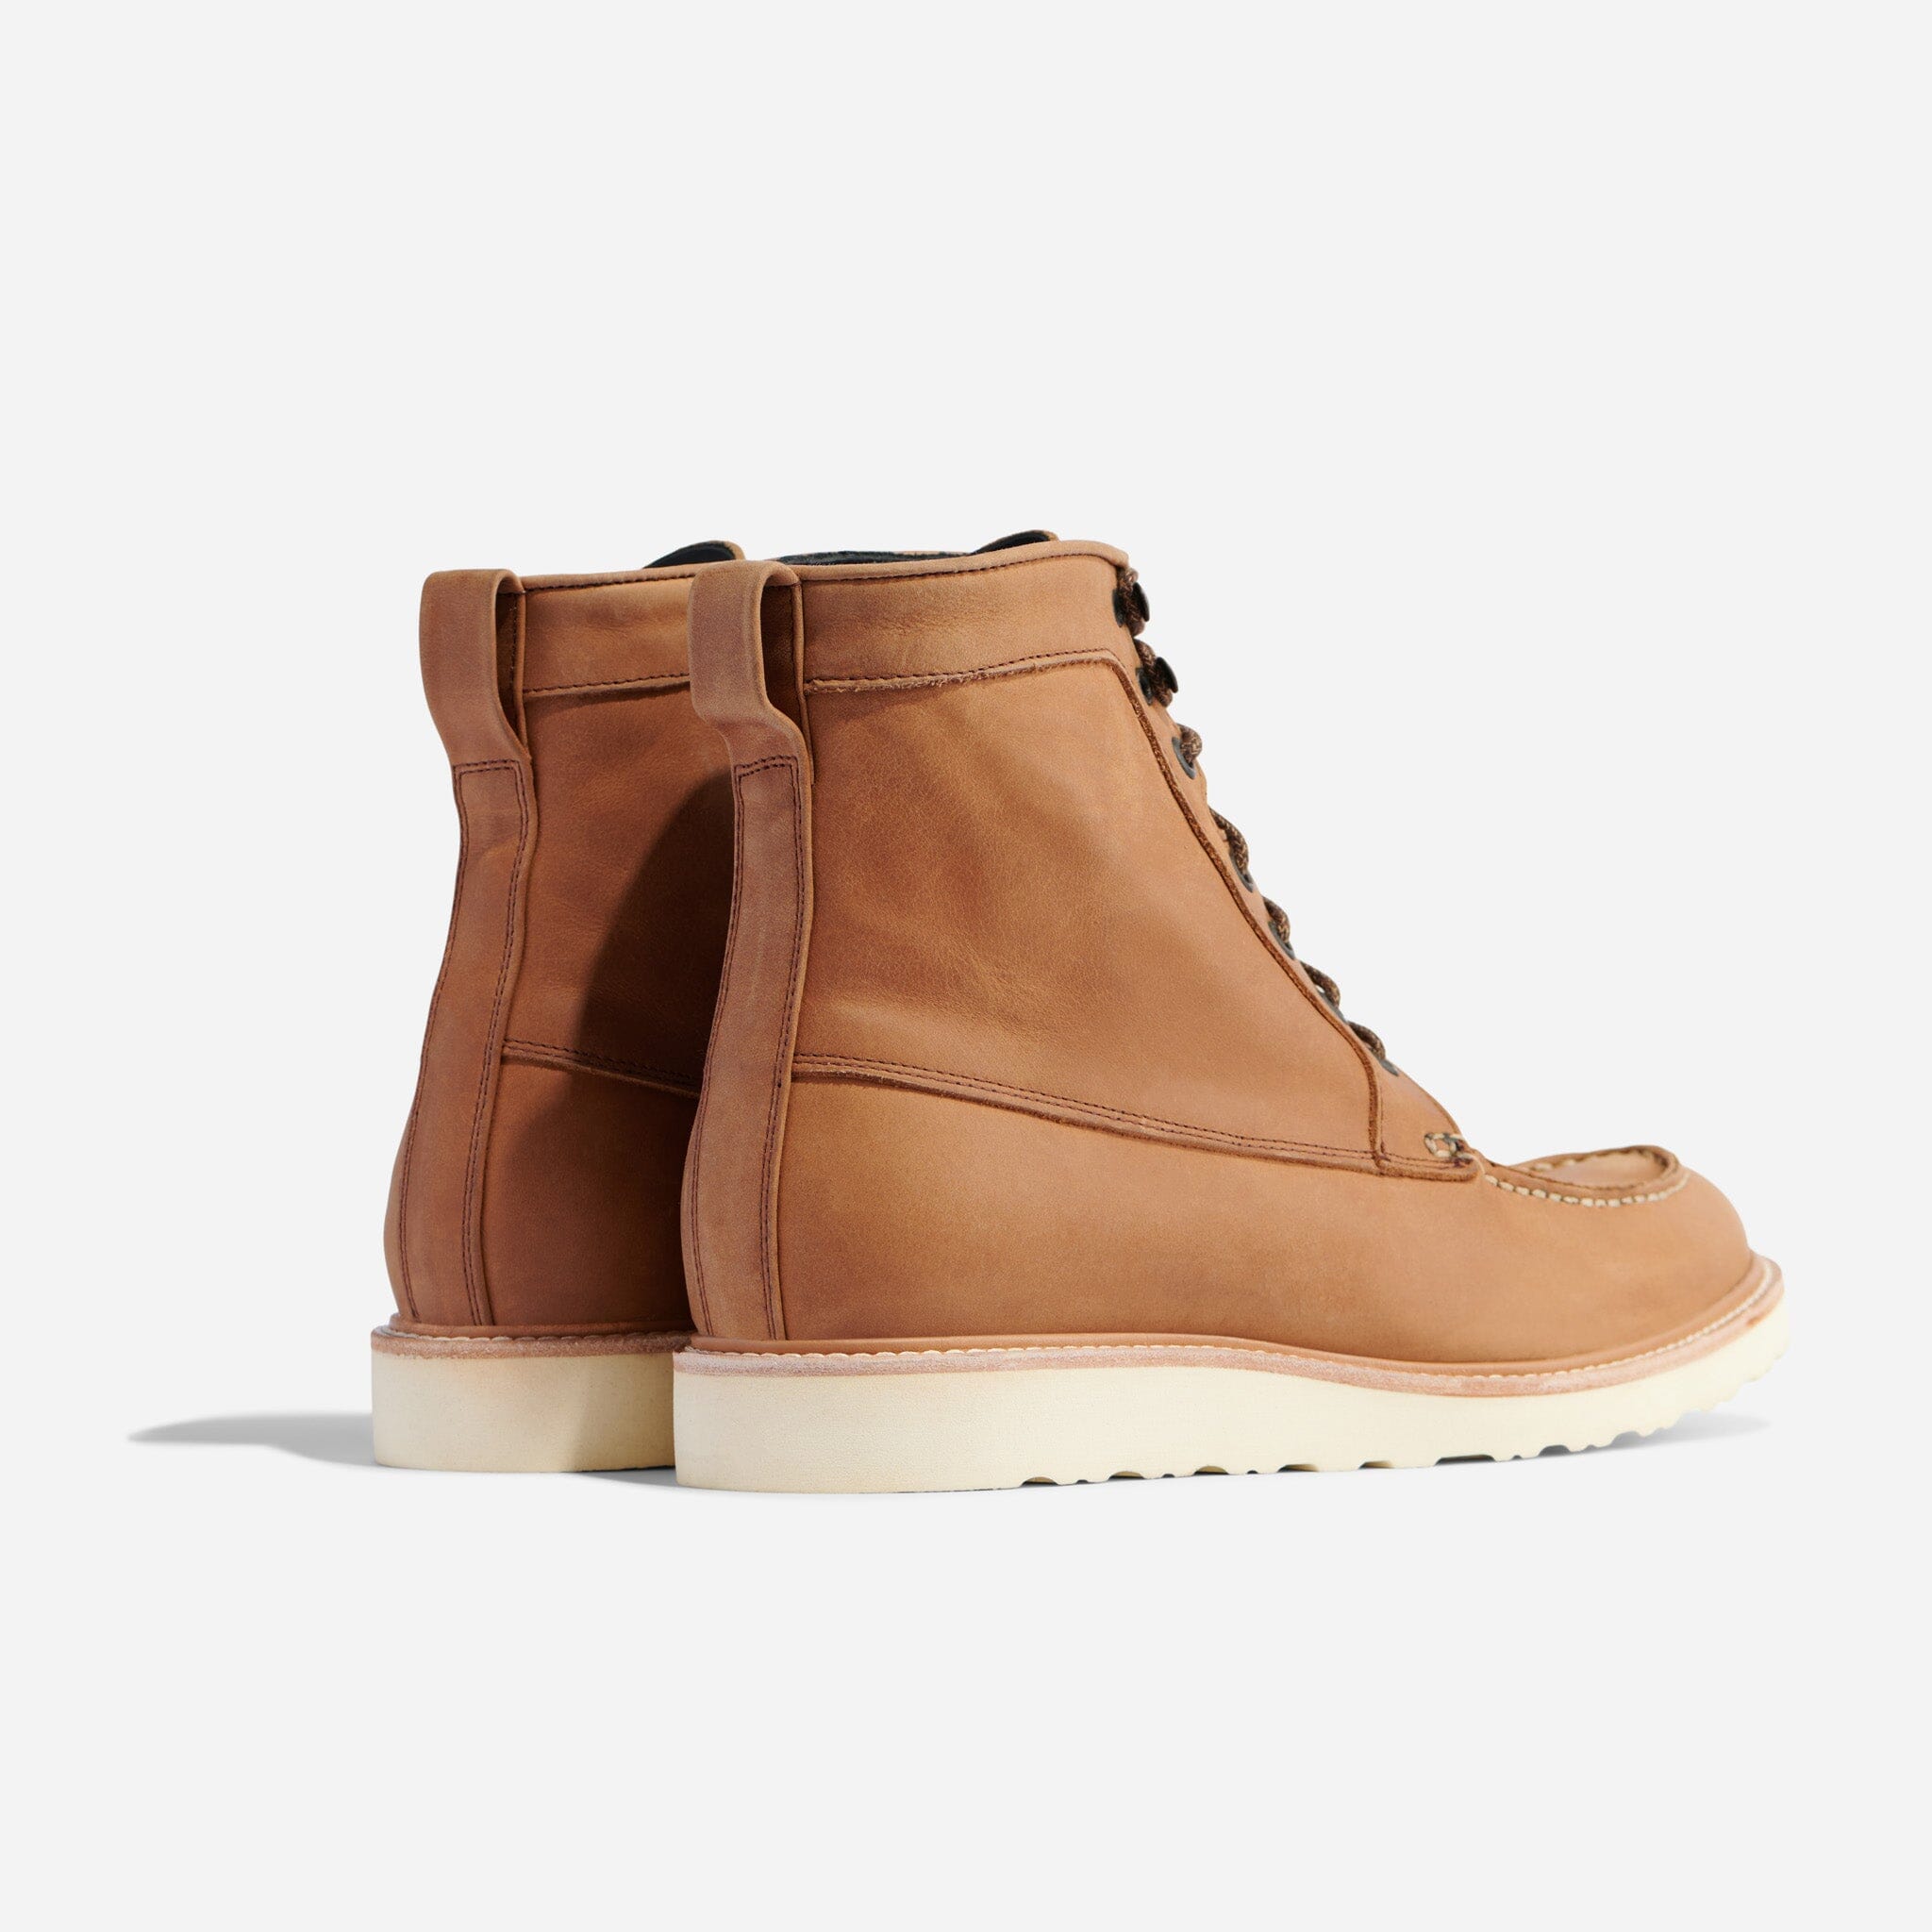 All-Weather Tobacco Mateo Boot